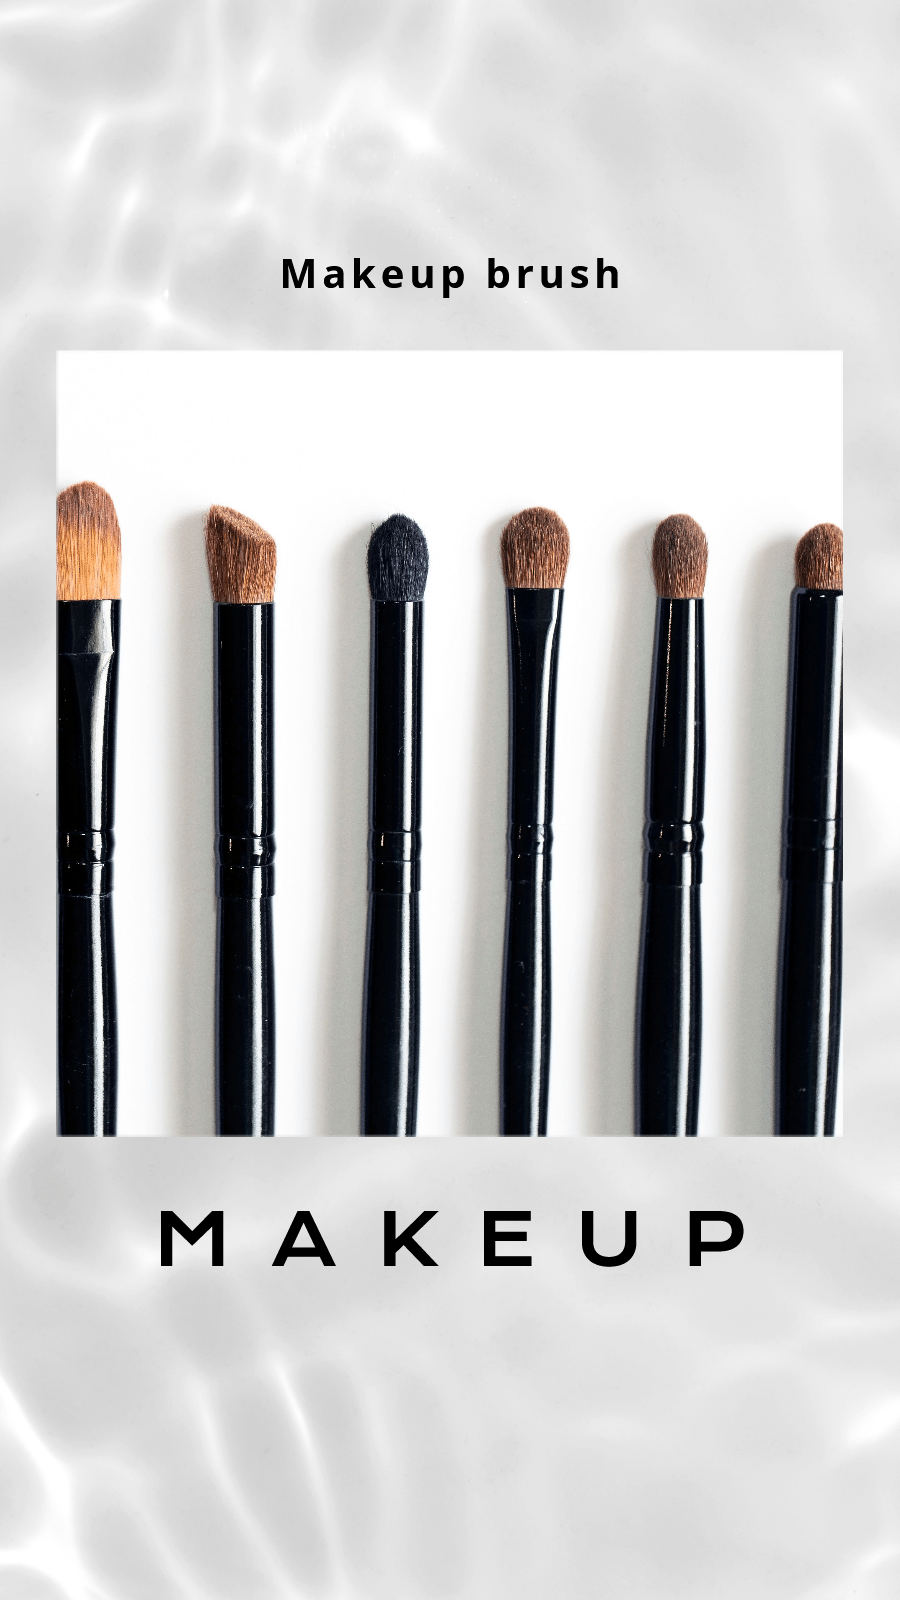 Simple Fashion Makeup Brush Display Introduction Instagram Story